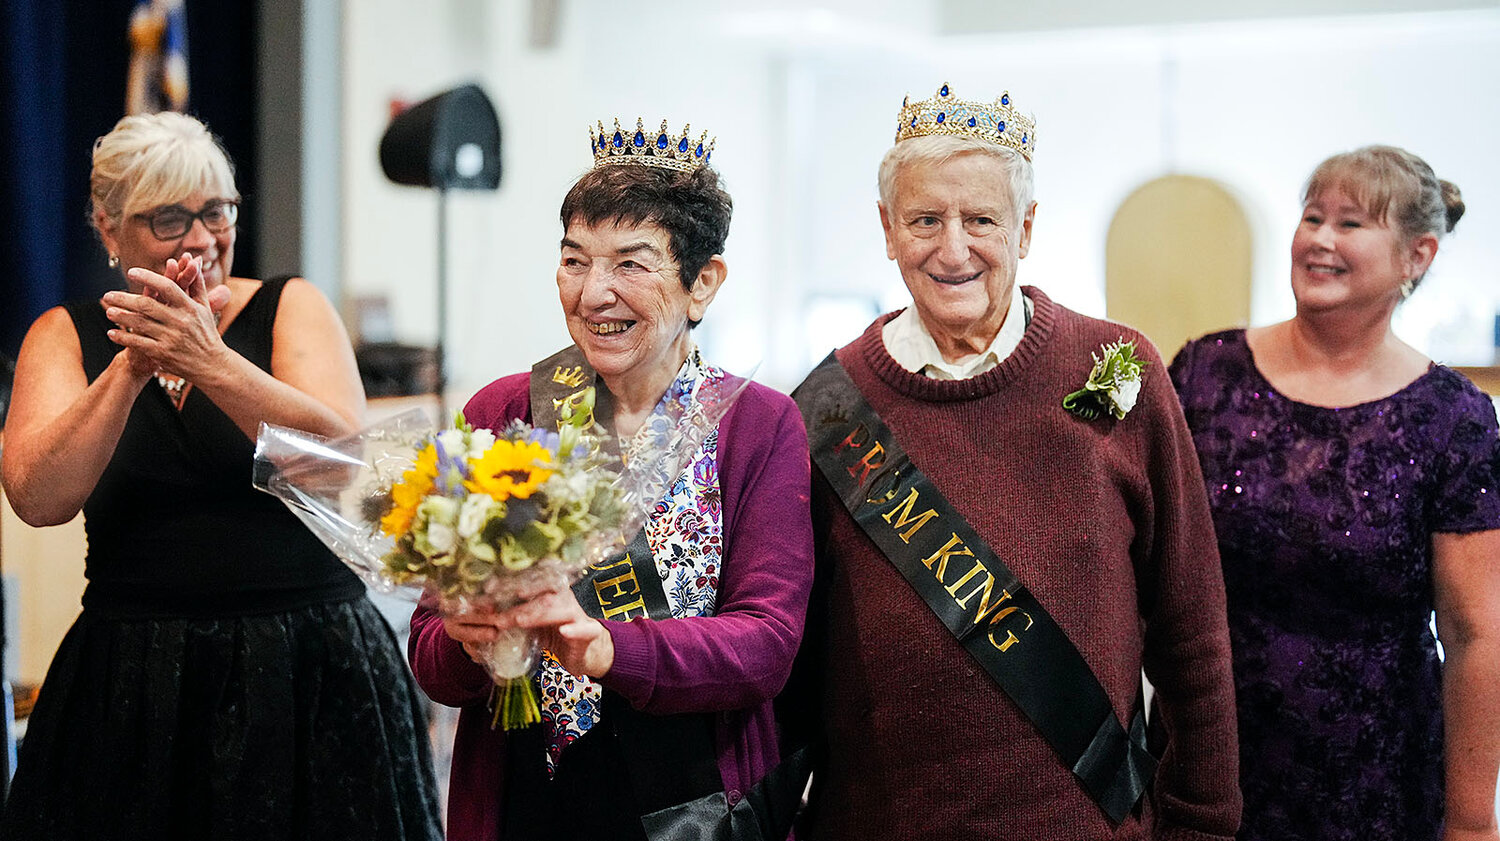 Maxine Cohen and her husband Avram were crowned king and queen of the prom.